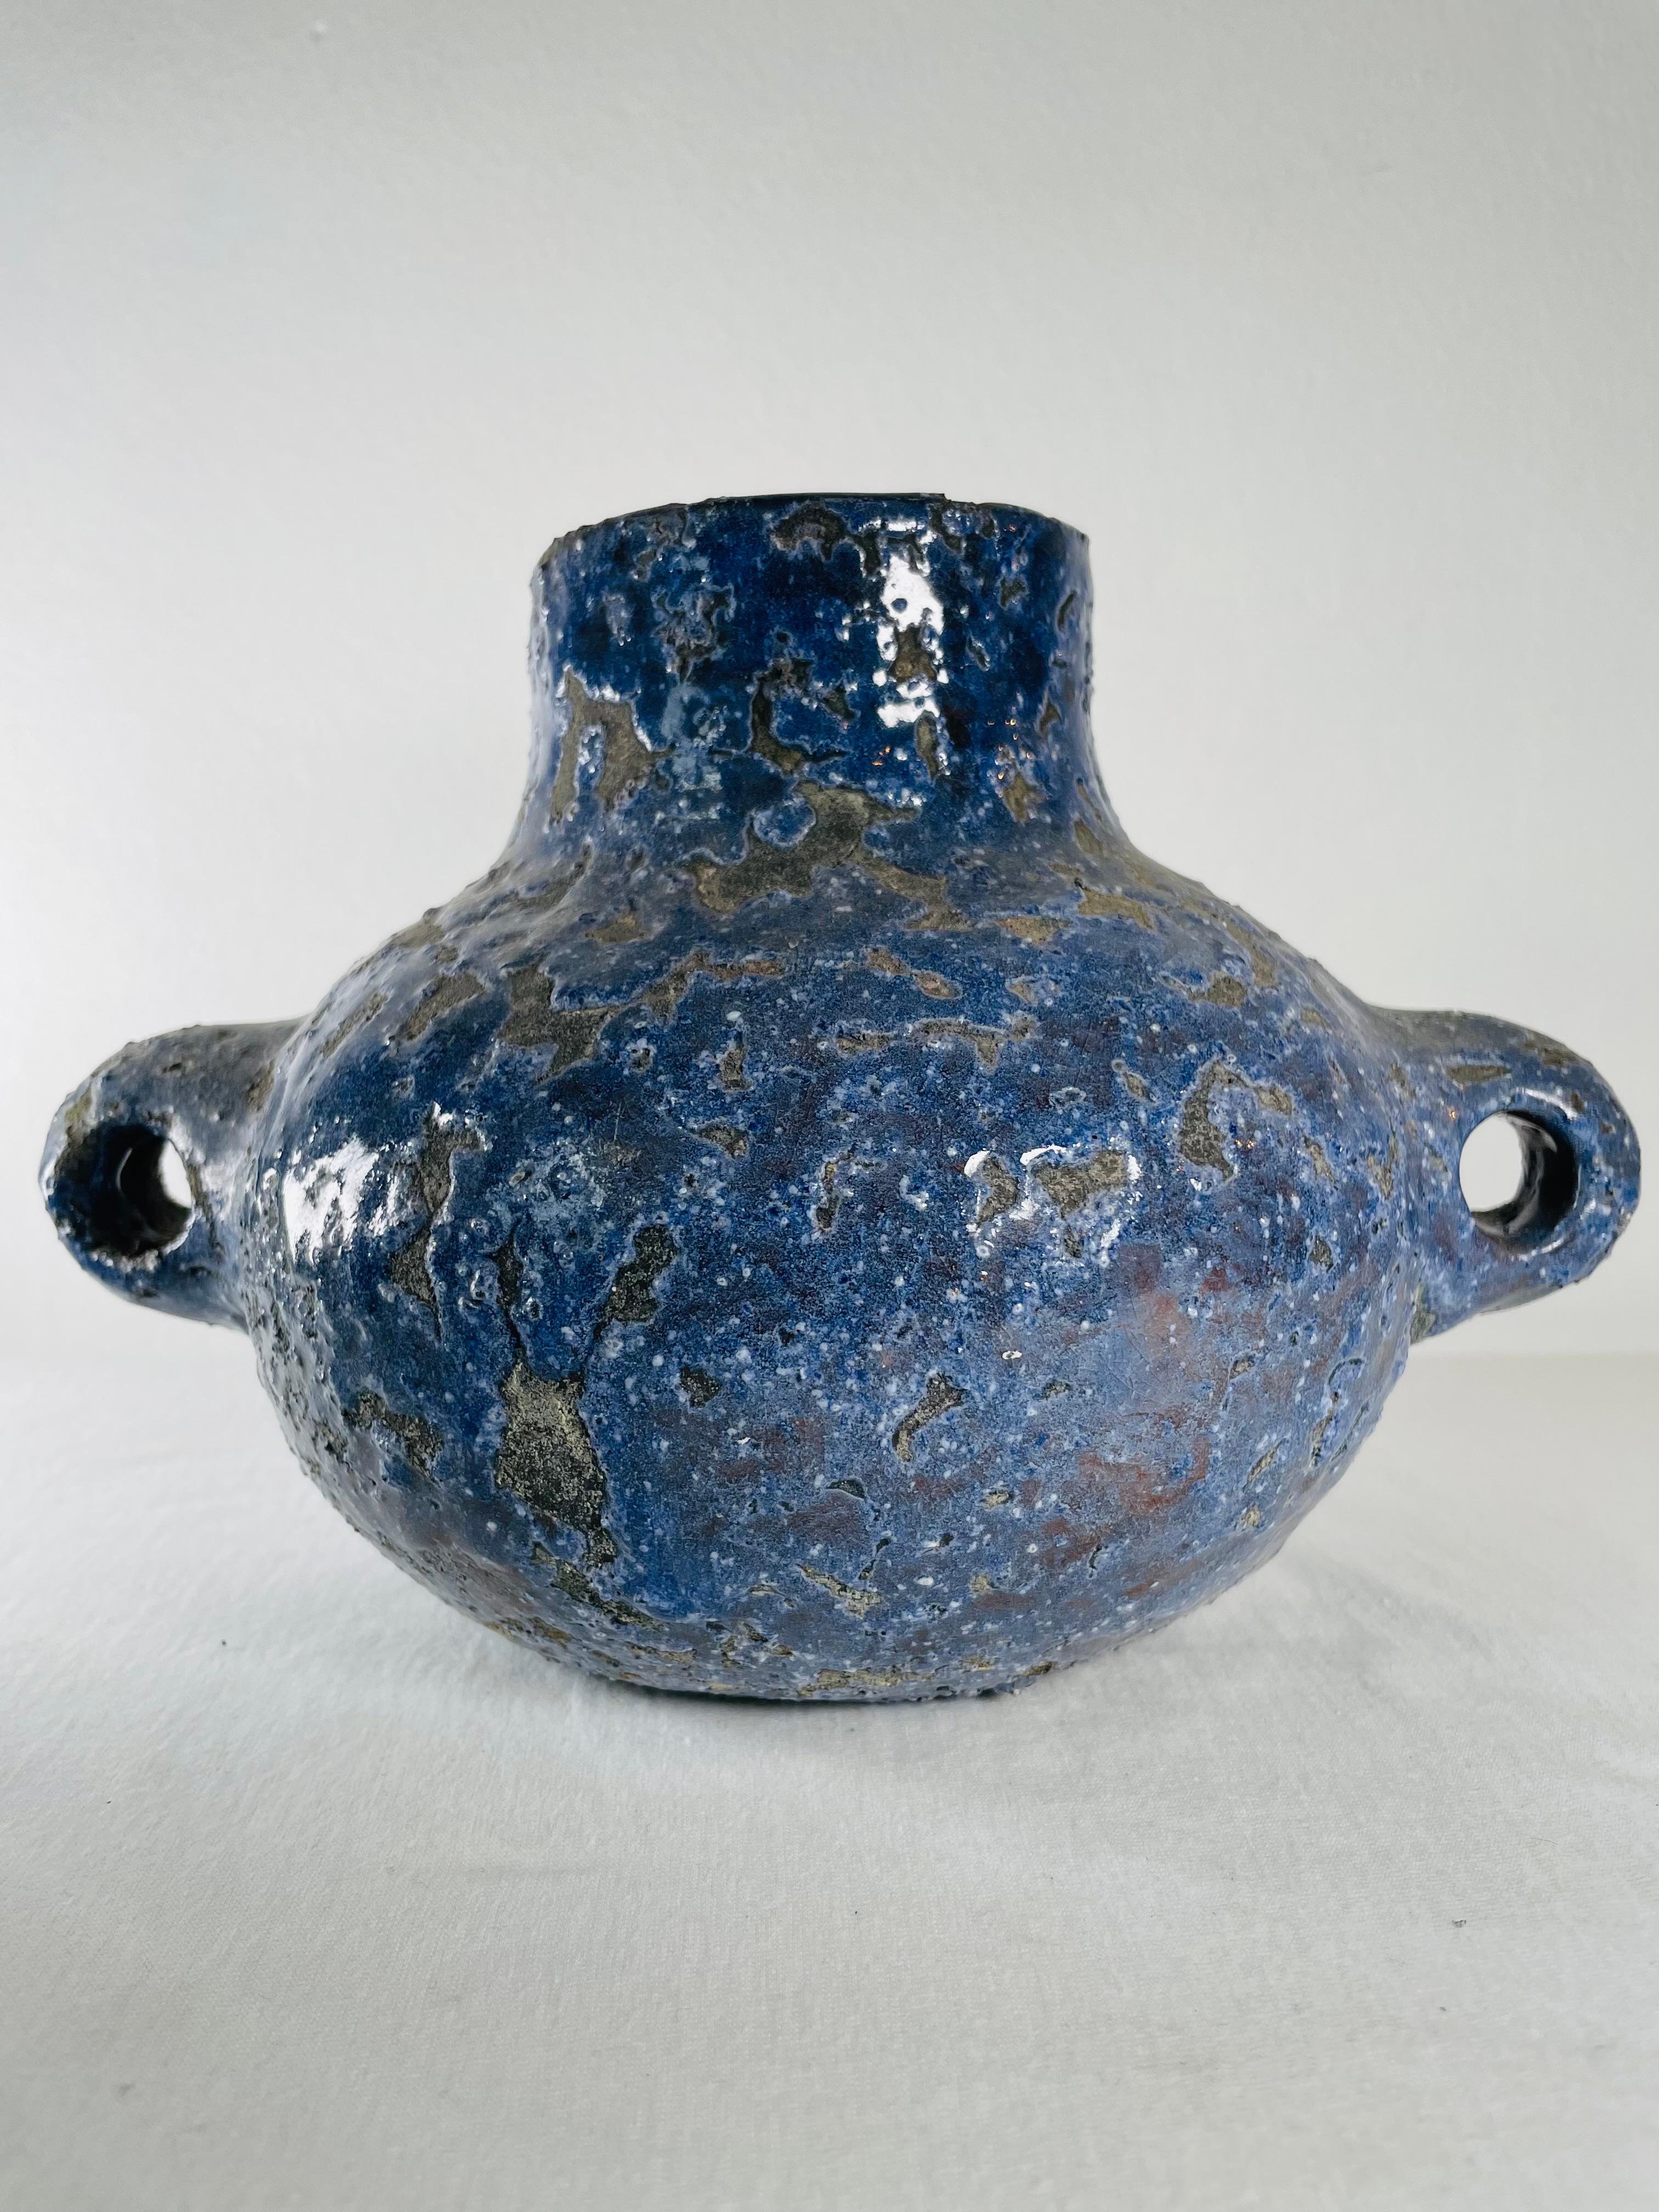 Vase with two handles in blue and black ceramic worked like lava. Handmade in Vallauris in the south of France by the artist Albert Thiry. Originally from Nice, the Thiry family settled in the famous village of potters in Vallauris in 1943.

After